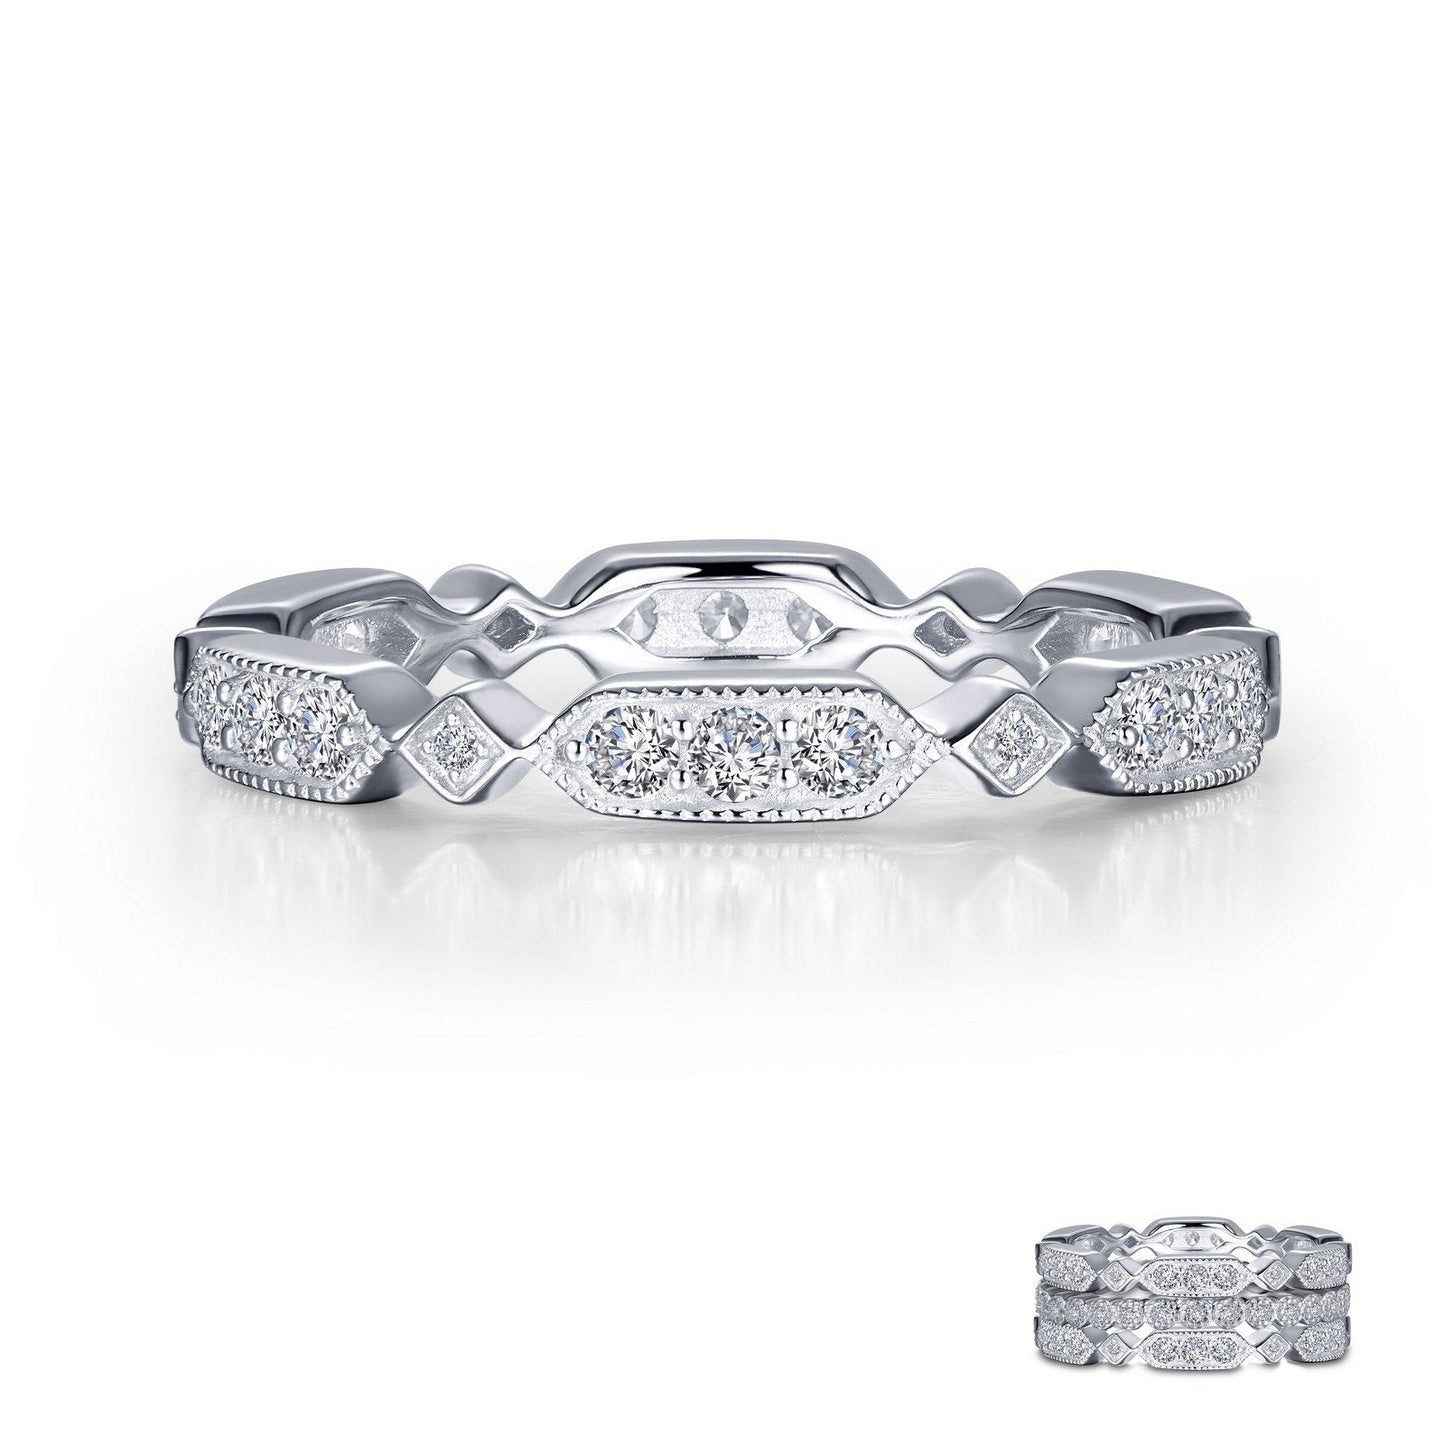 Load image into Gallery viewer, Lafonn Alternating Eternity Band Simulated Diamond RINGS Size 9 Platinum 0.42 CTS 3.0mm (W)
